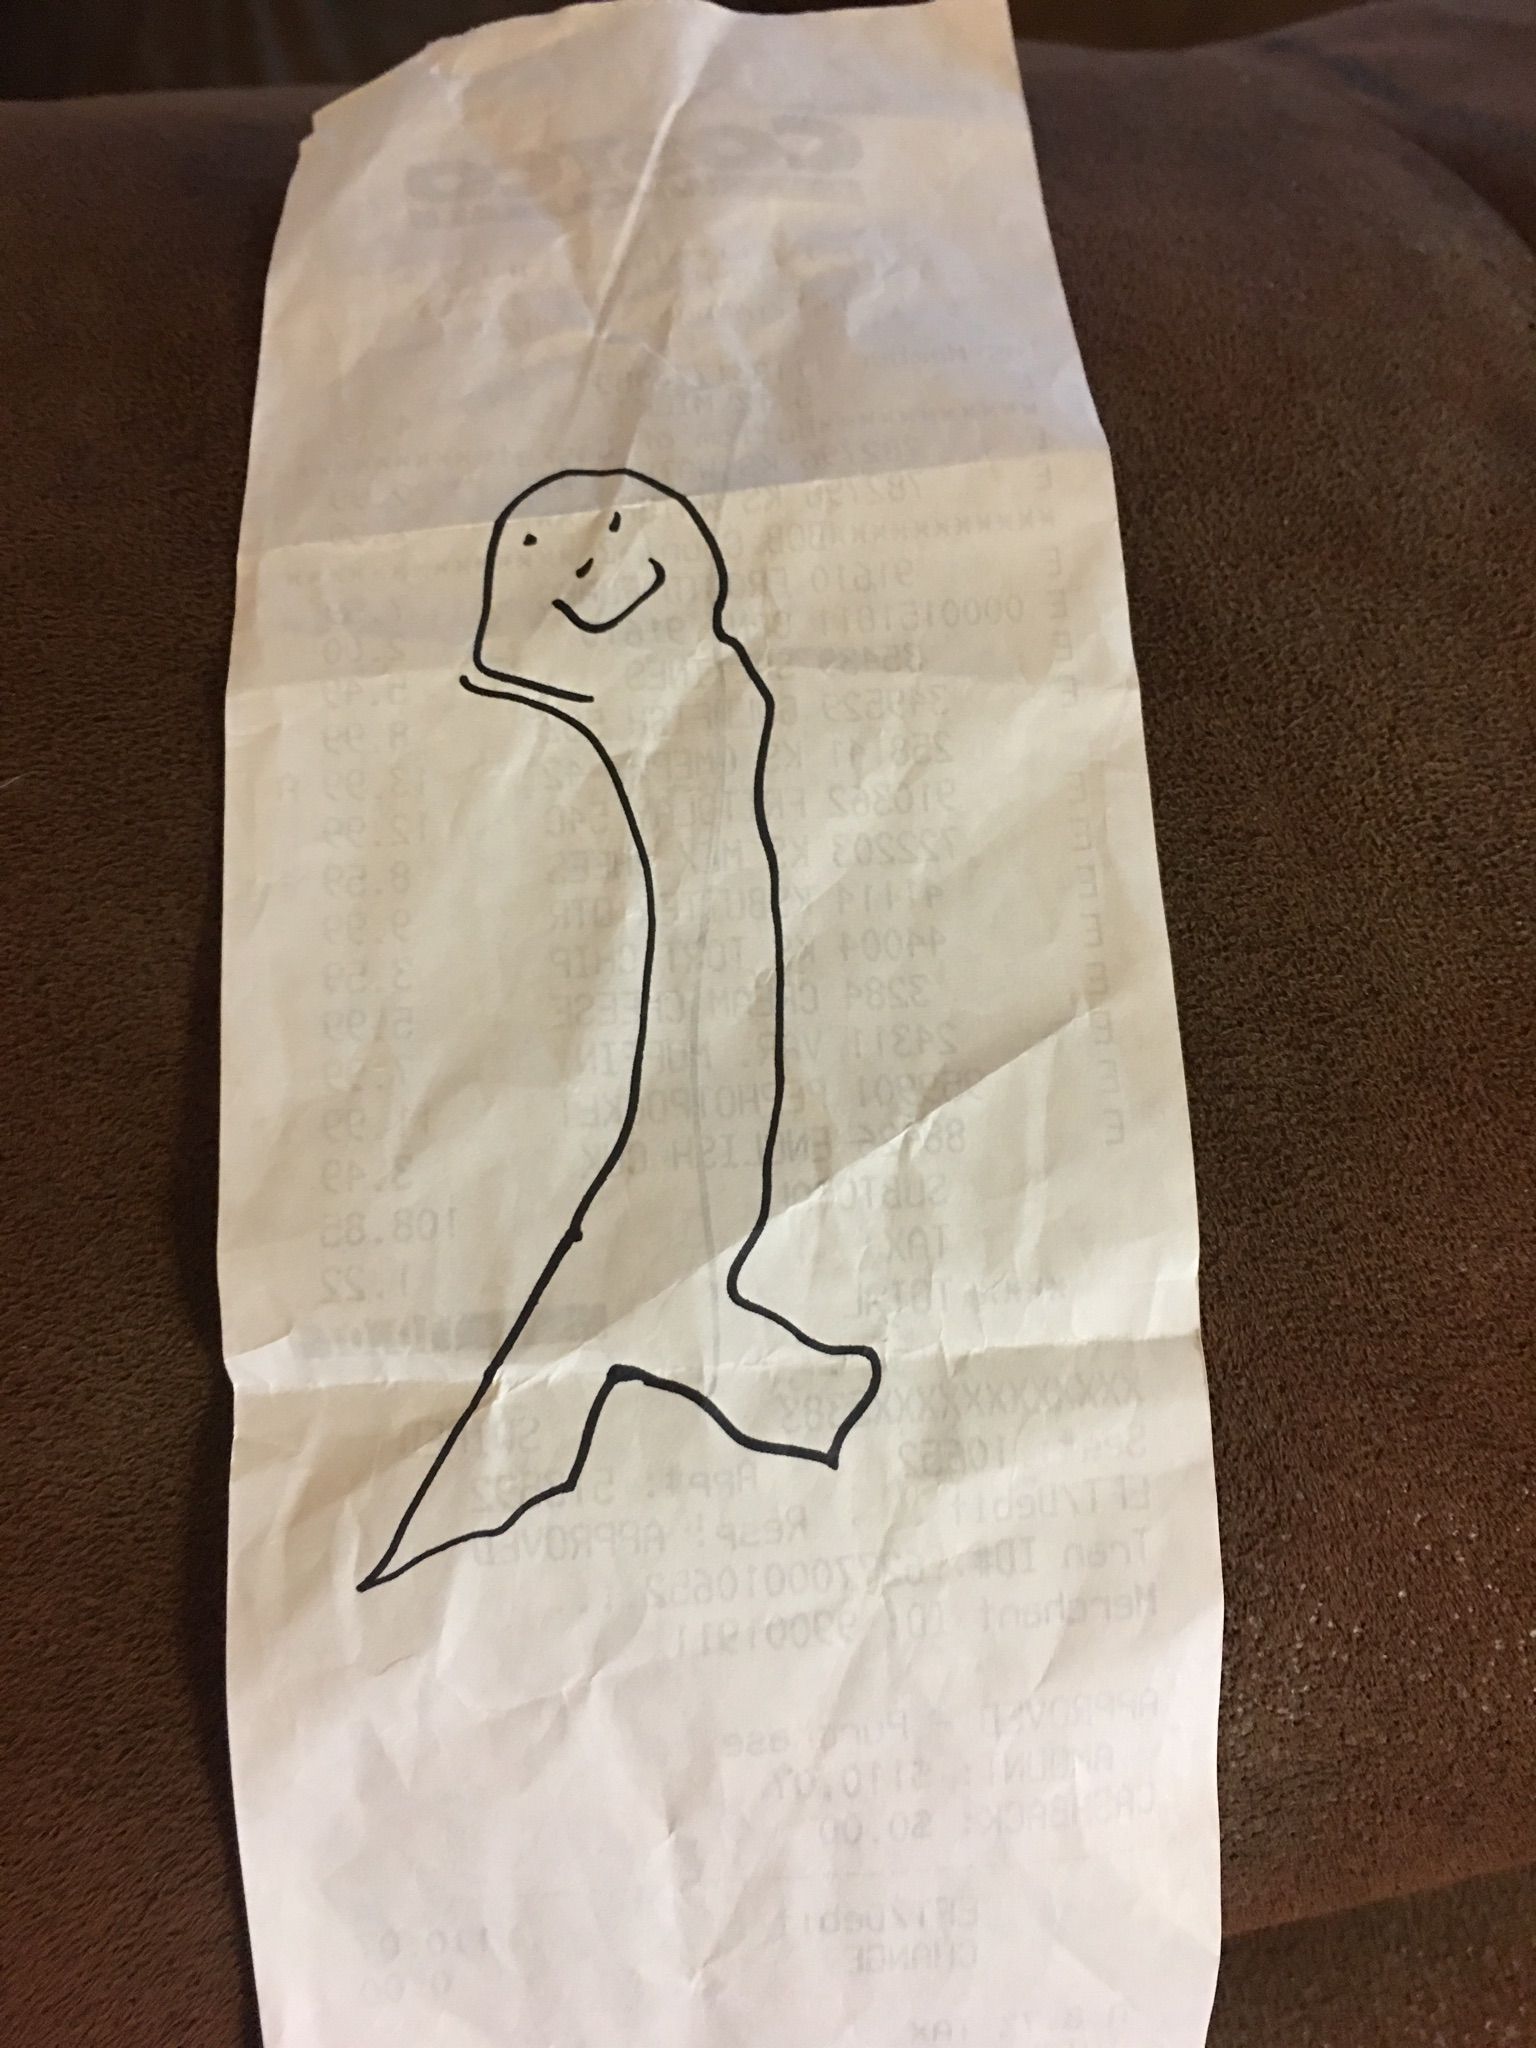 Daughter asked the Costco guy to draw a mermaid when he checked our receipt. He handed it back and muttered an apology to my wife...